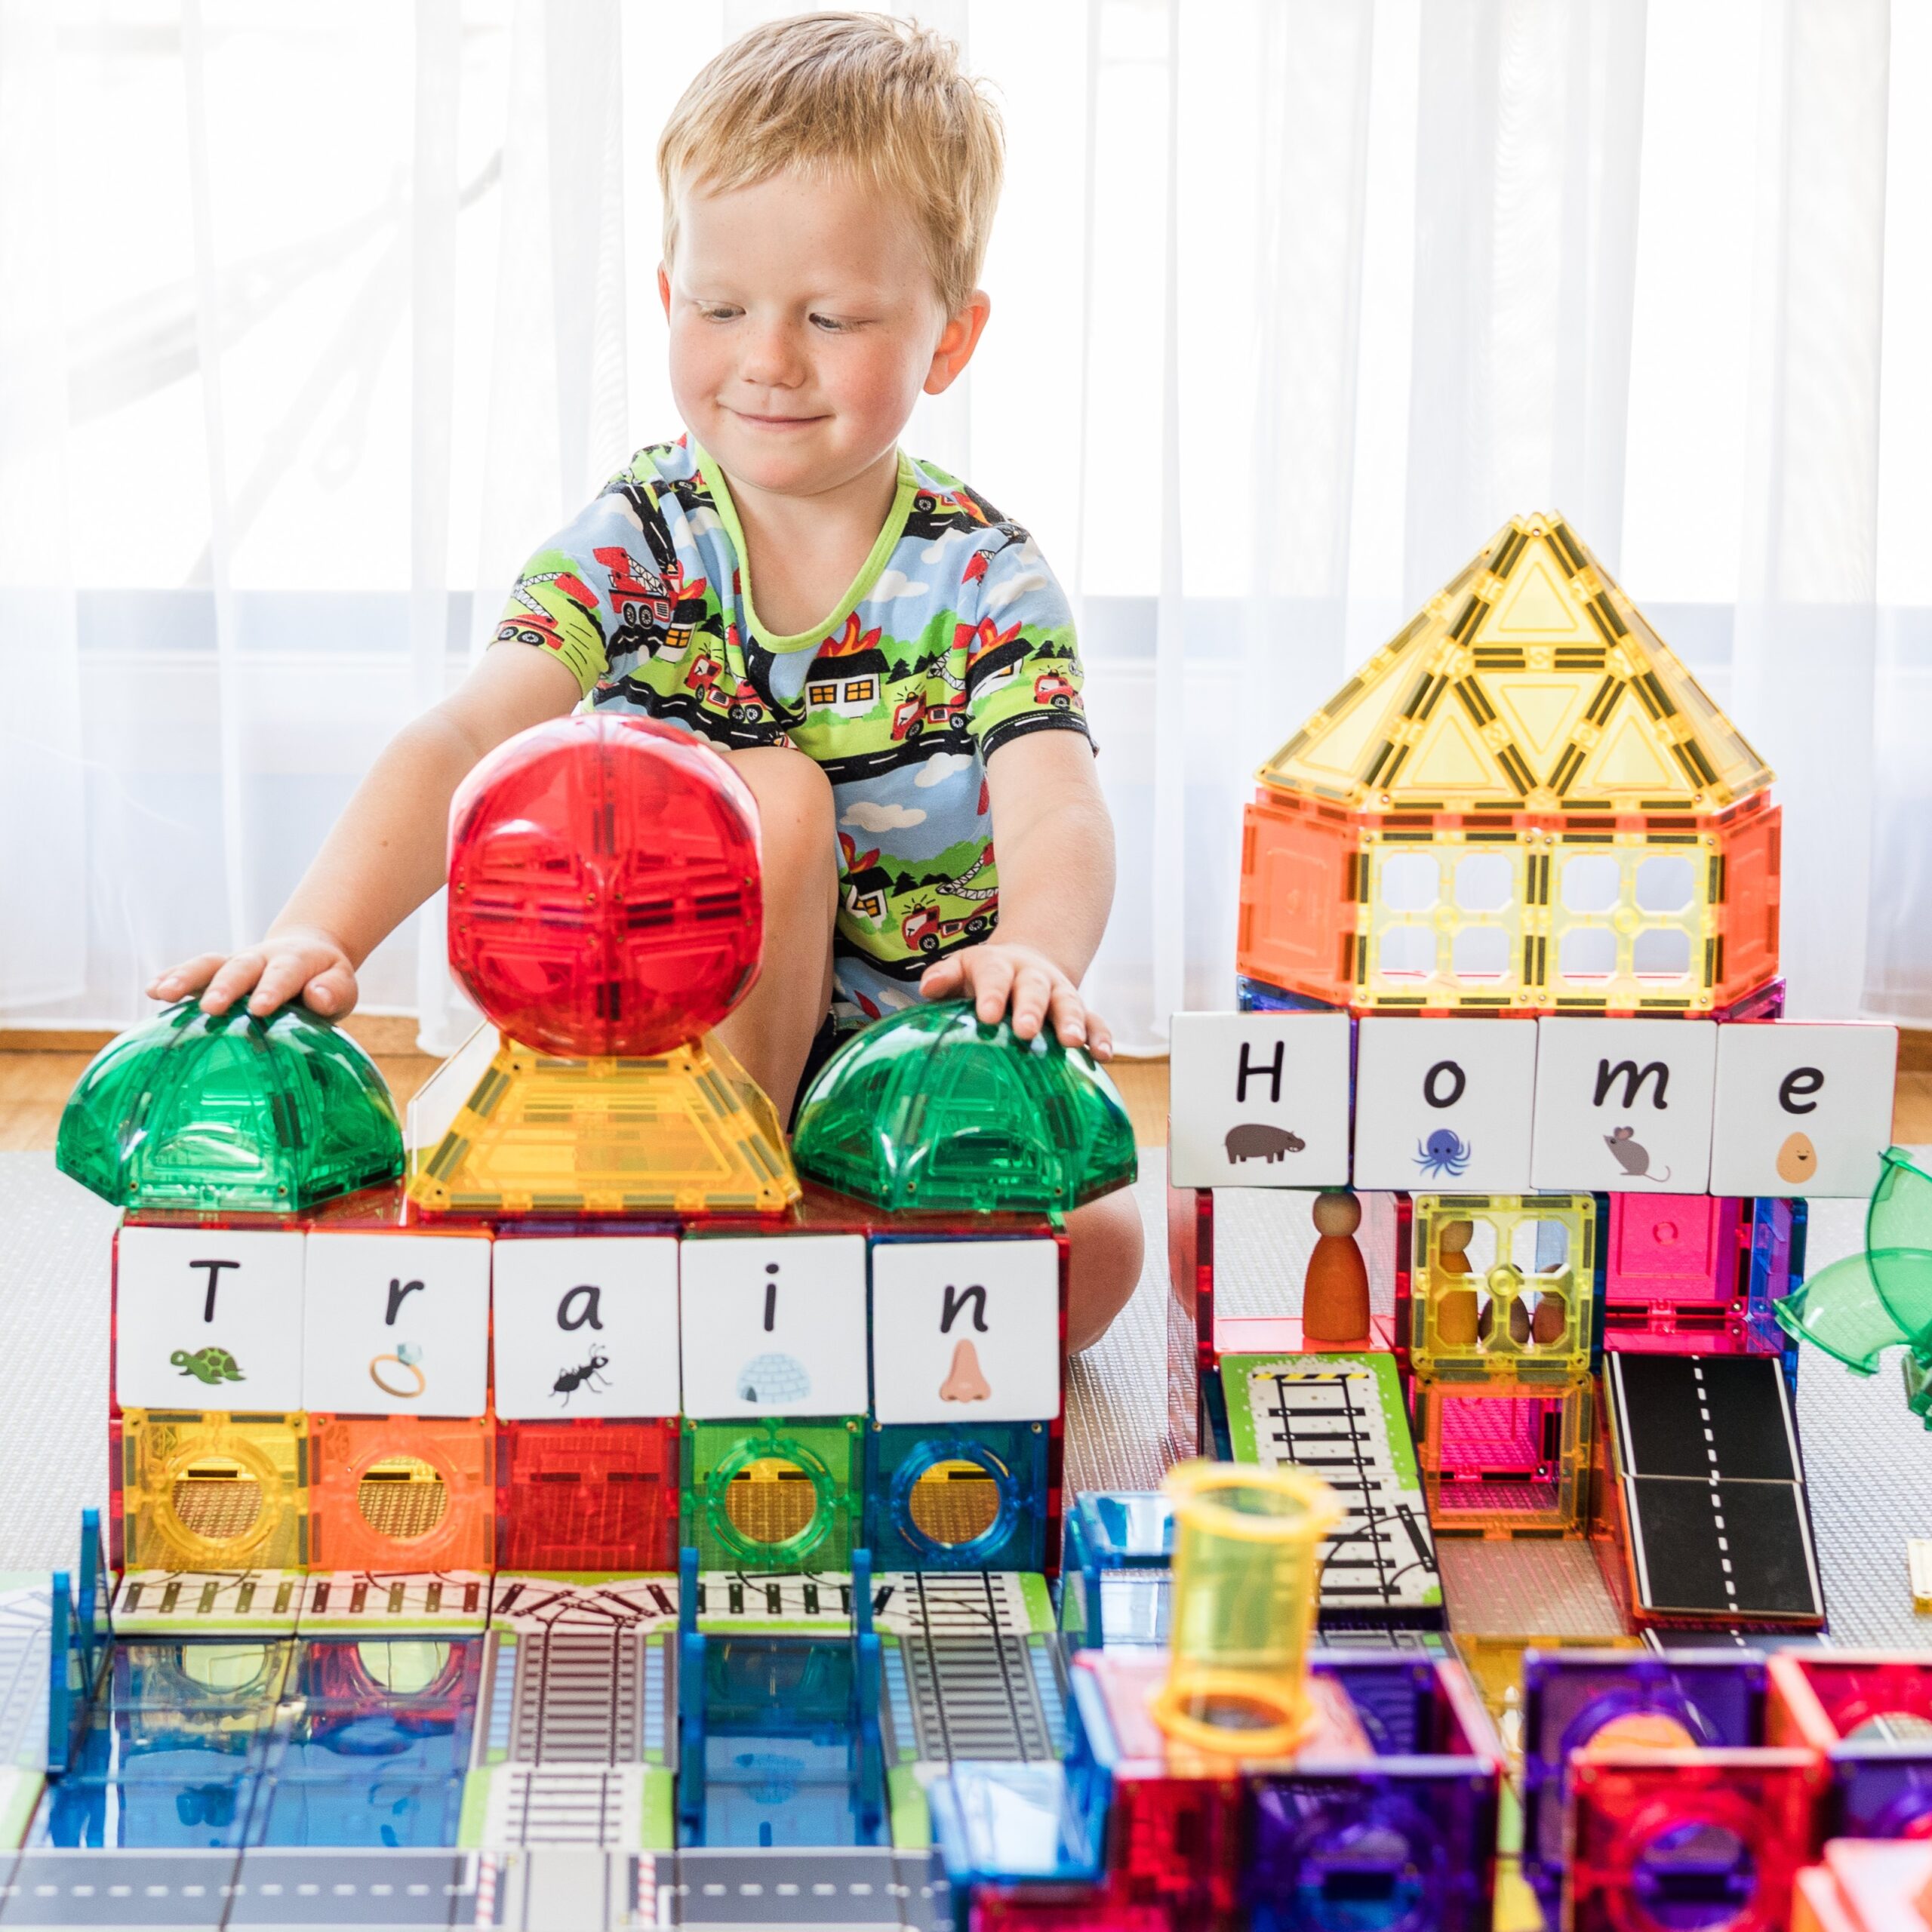 Child playing with dome and geometry tile packs in a playroom